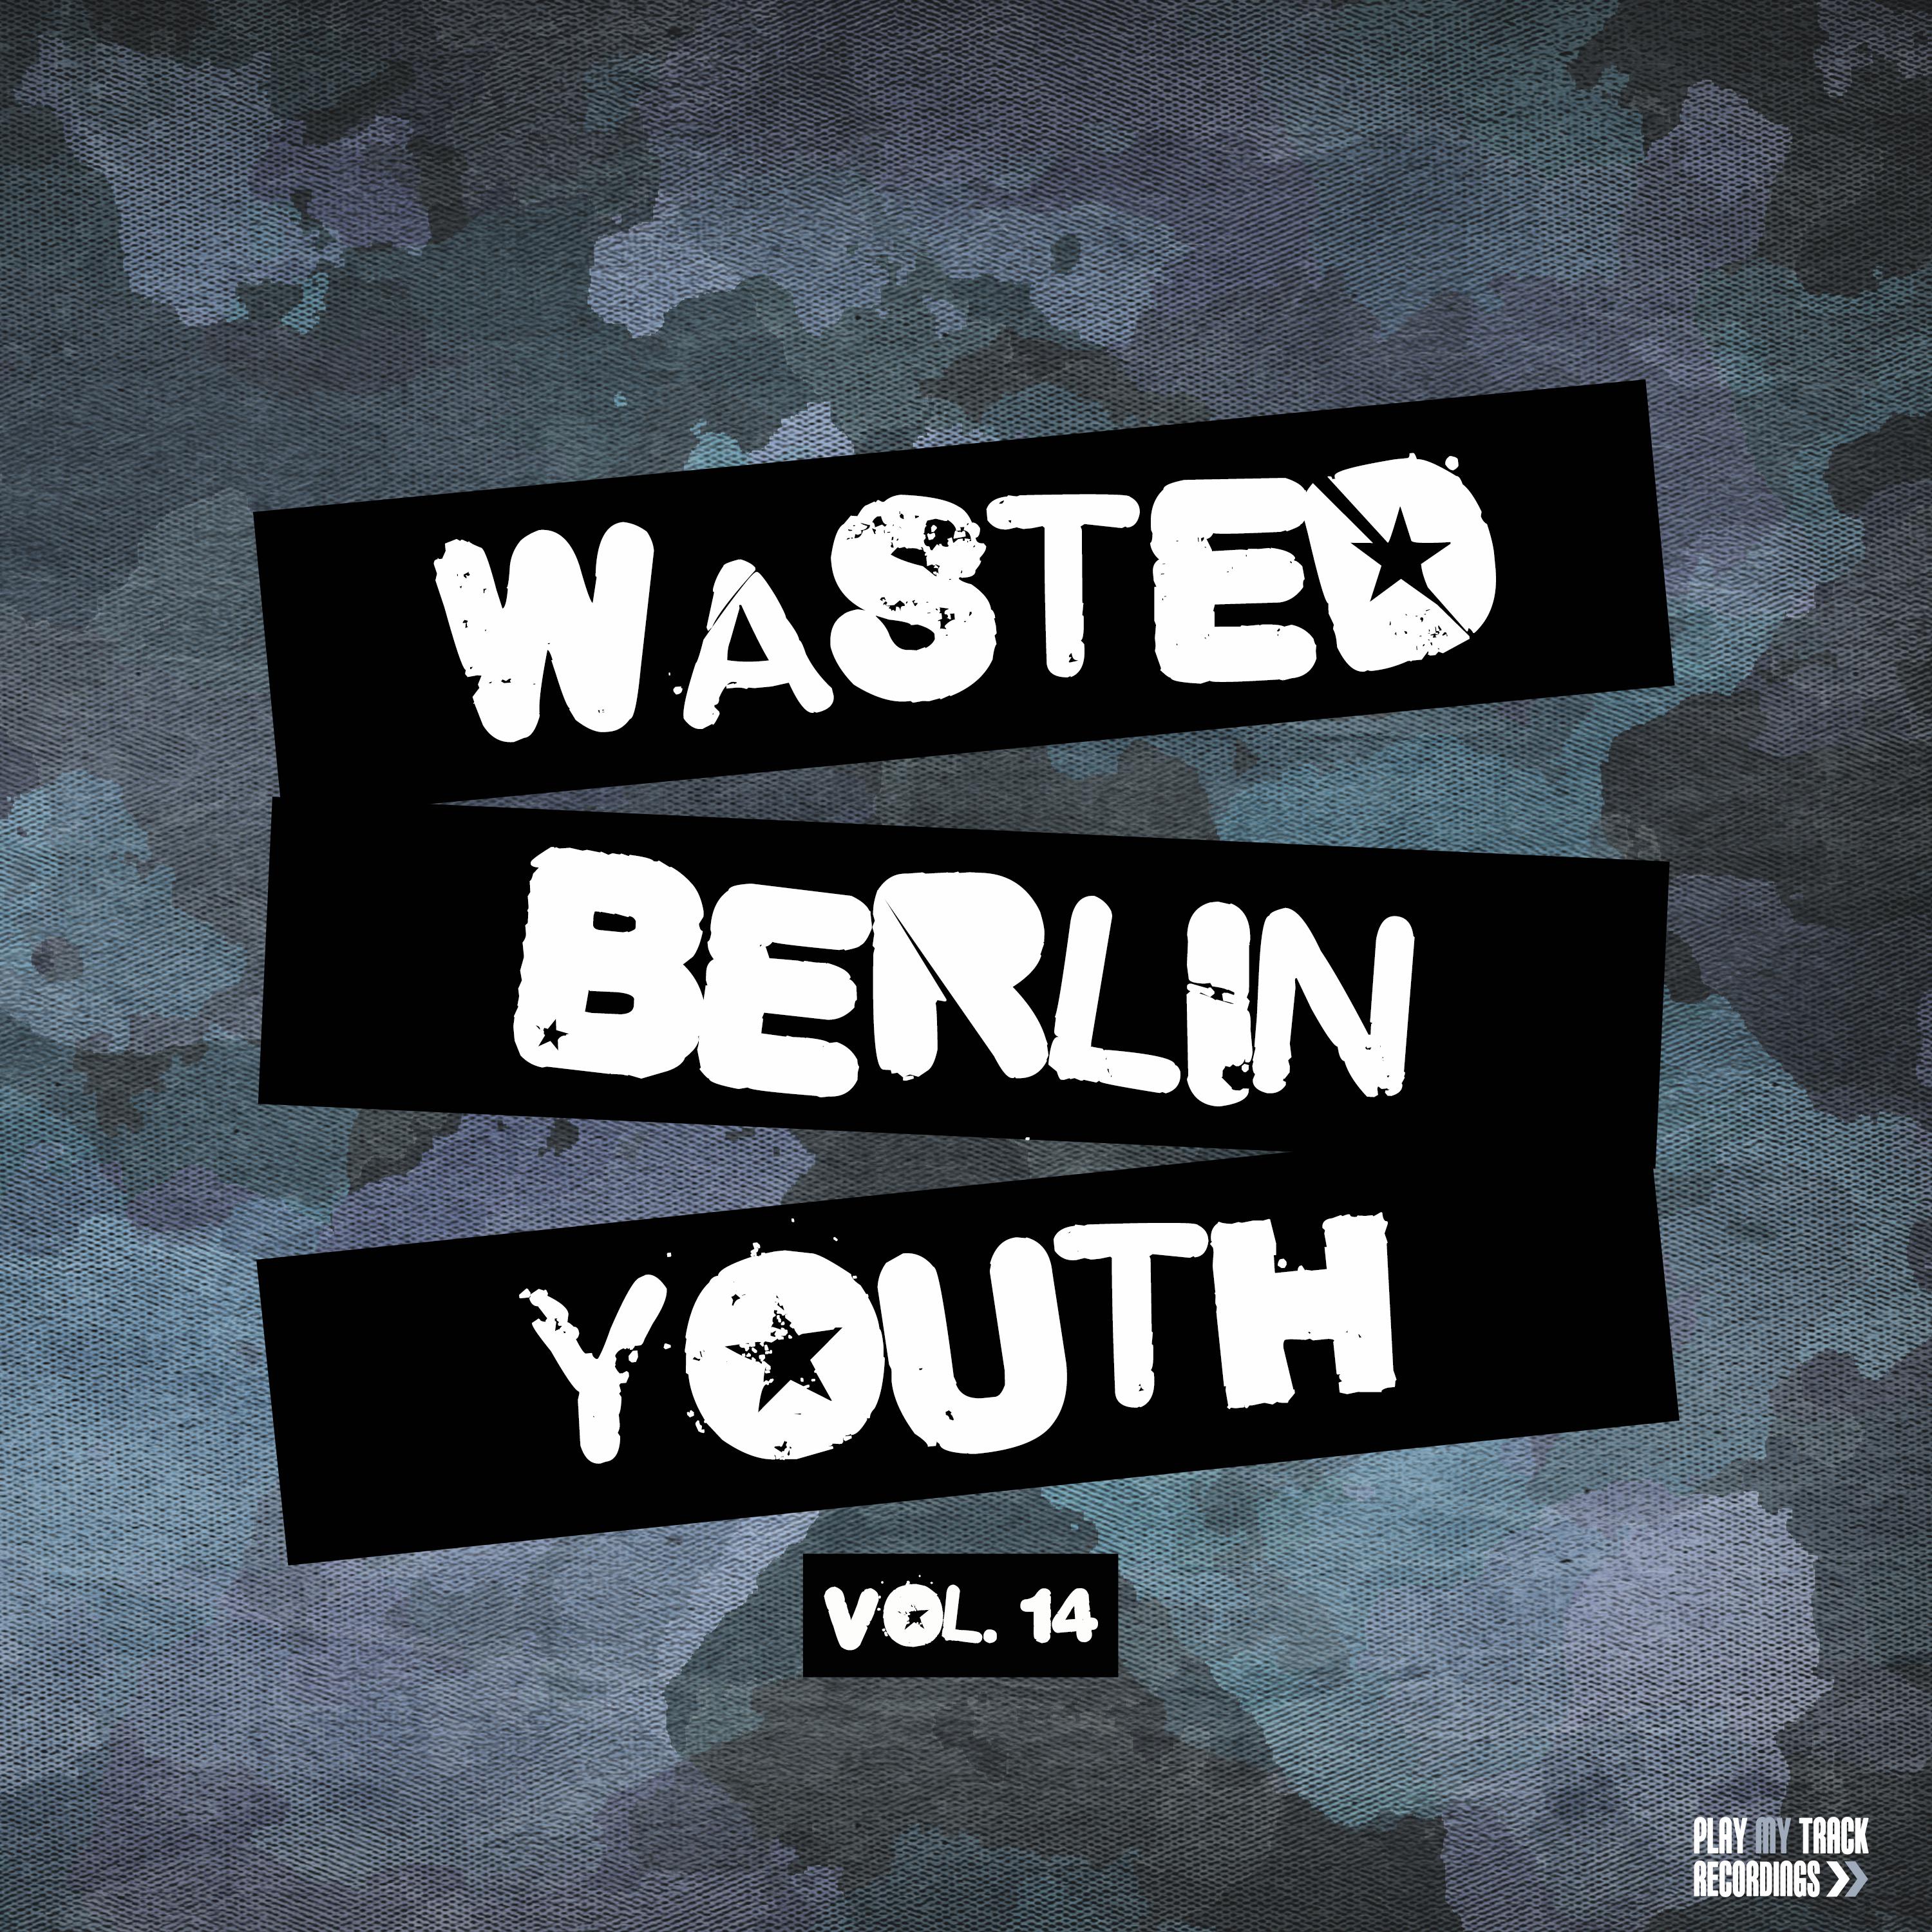 Wasted Berlin Youth, Vol. 14